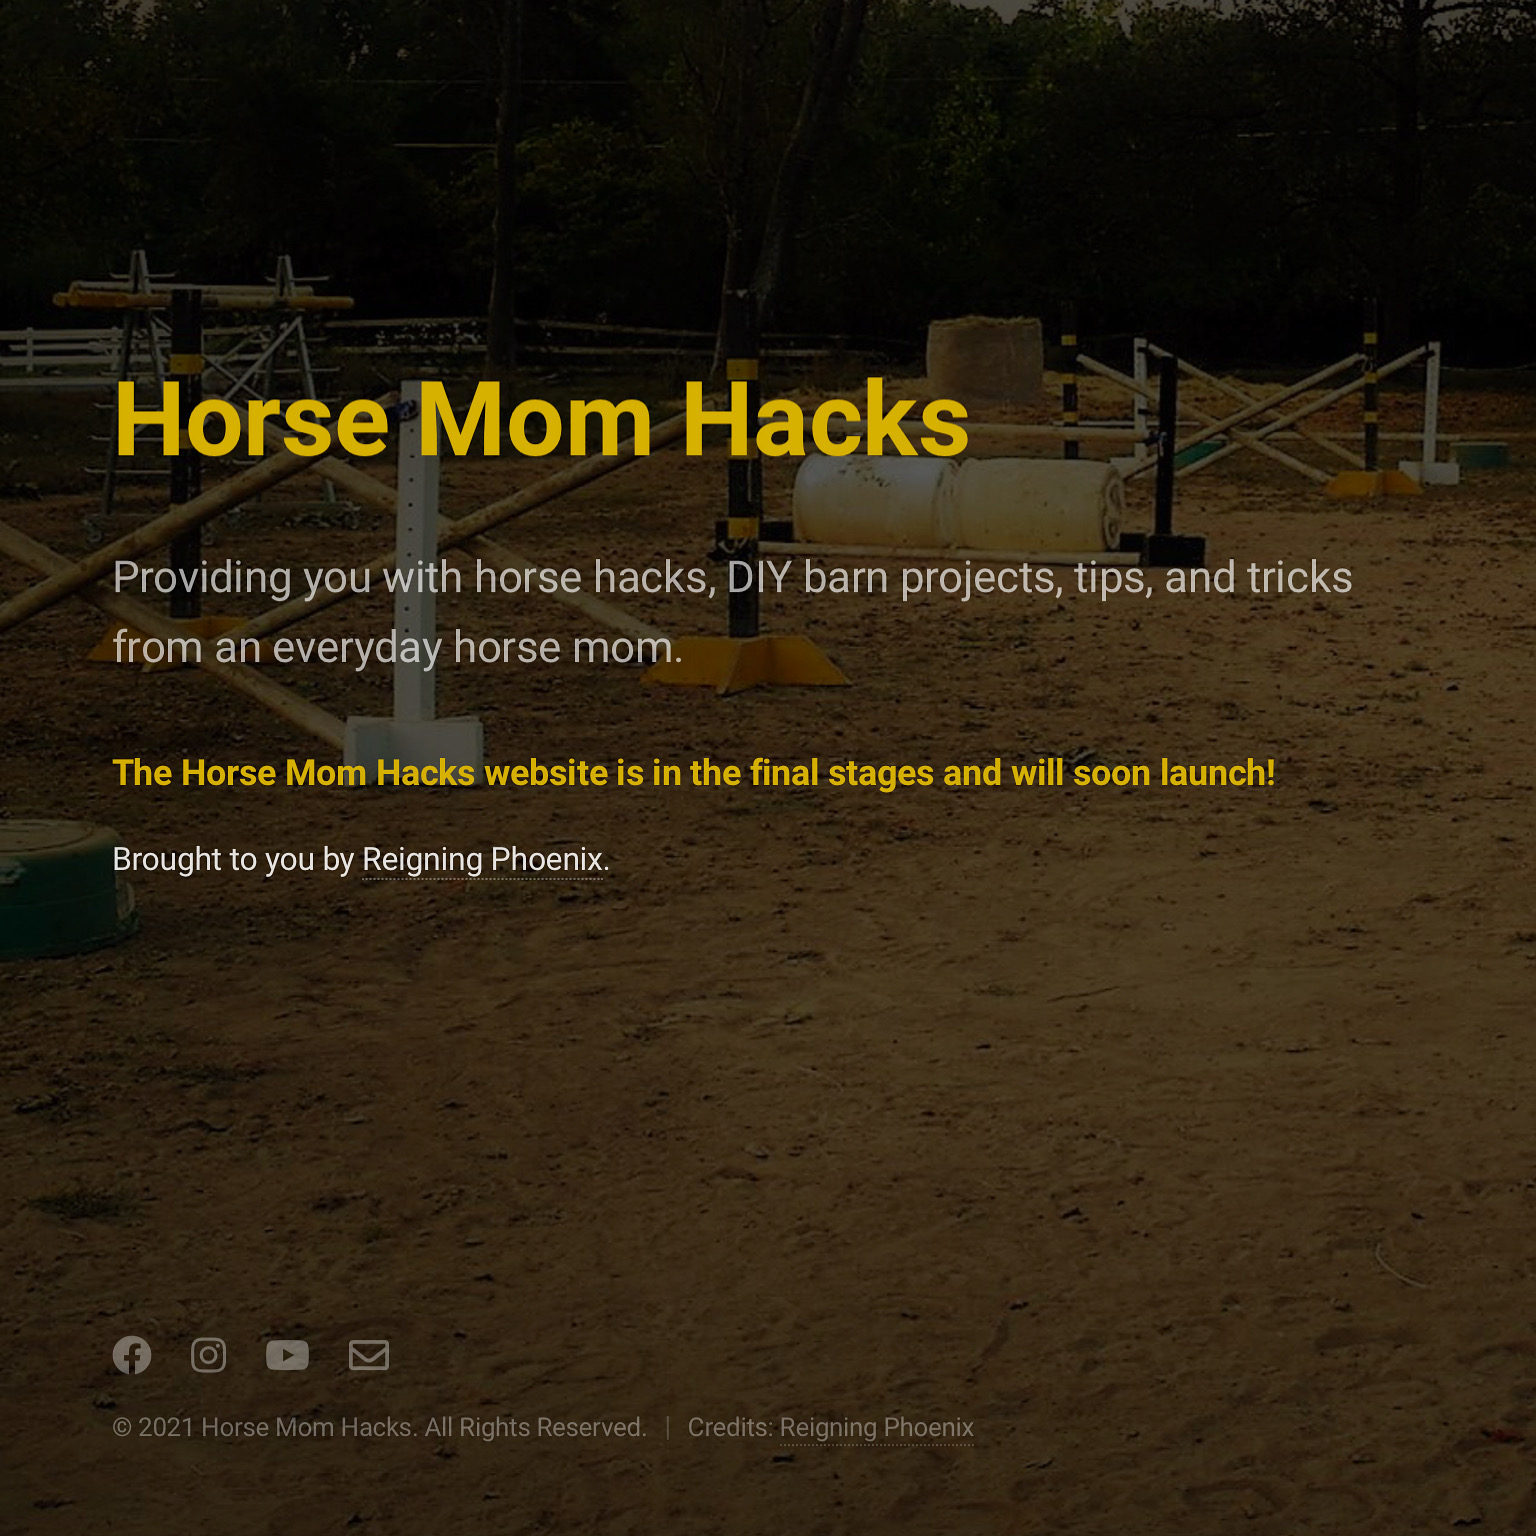 Horse Mom Hacks Launch Site Preview